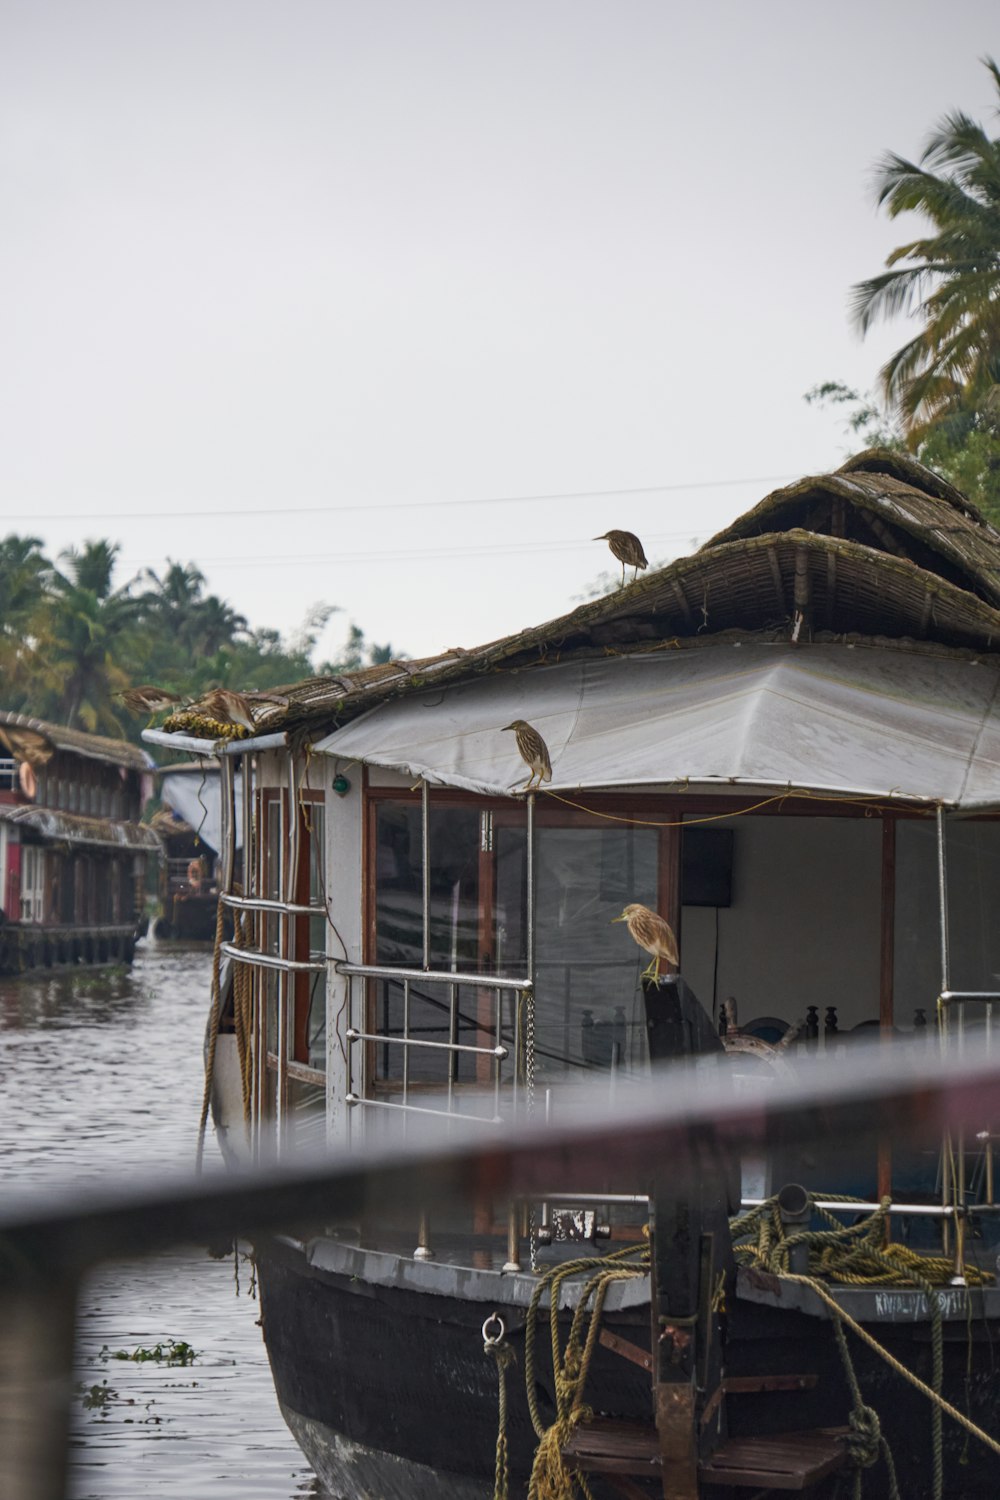 a houseboat with a thatched roof and a bird perched on the roof